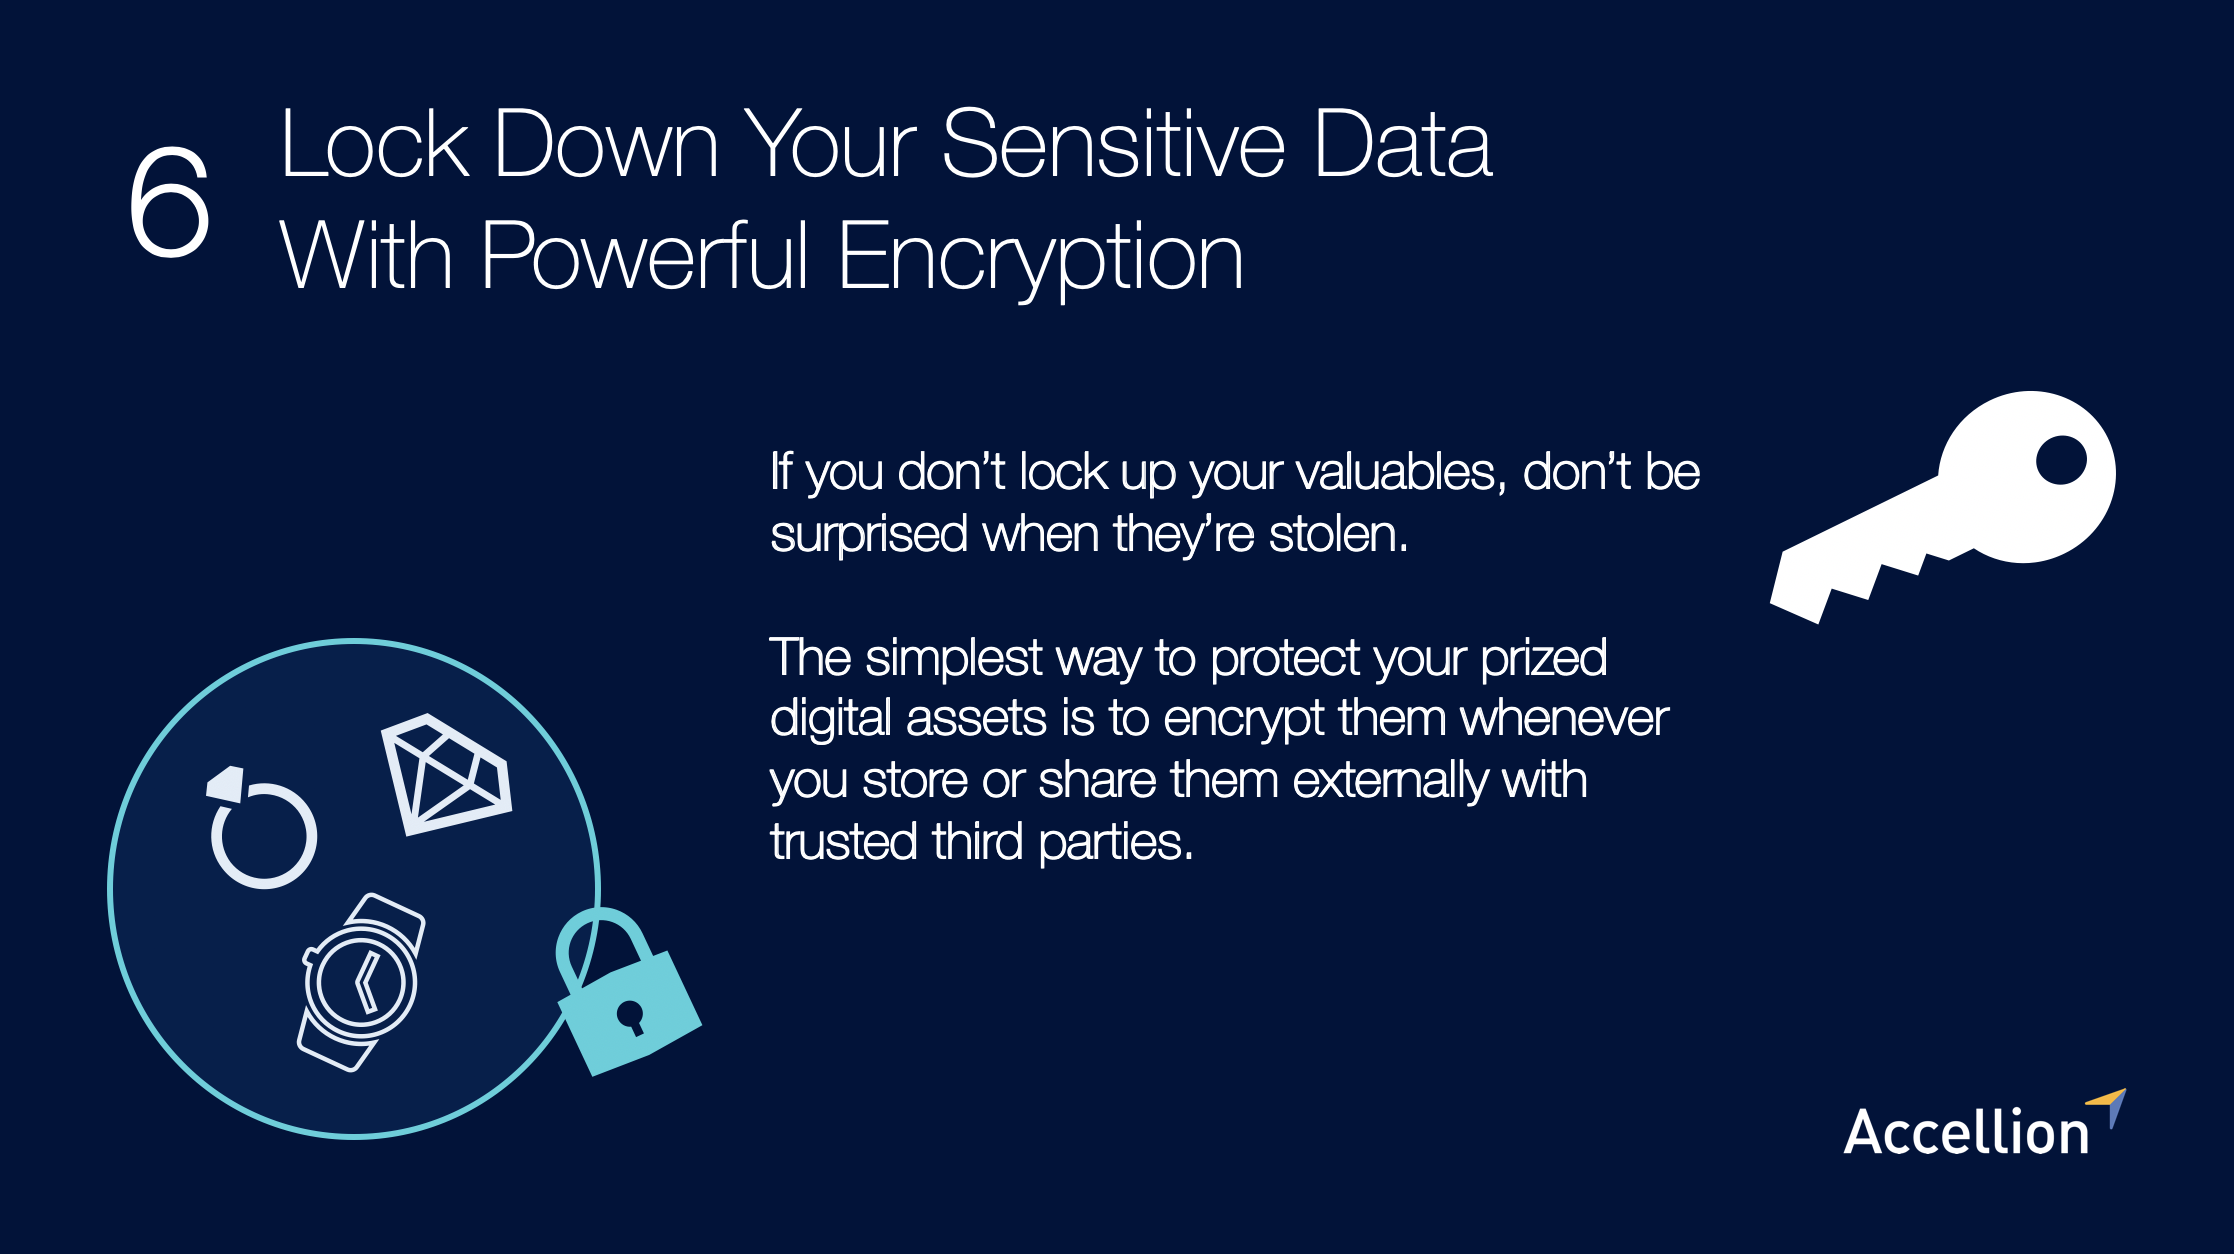 Lock Down Your Sensitive Content With Encryption